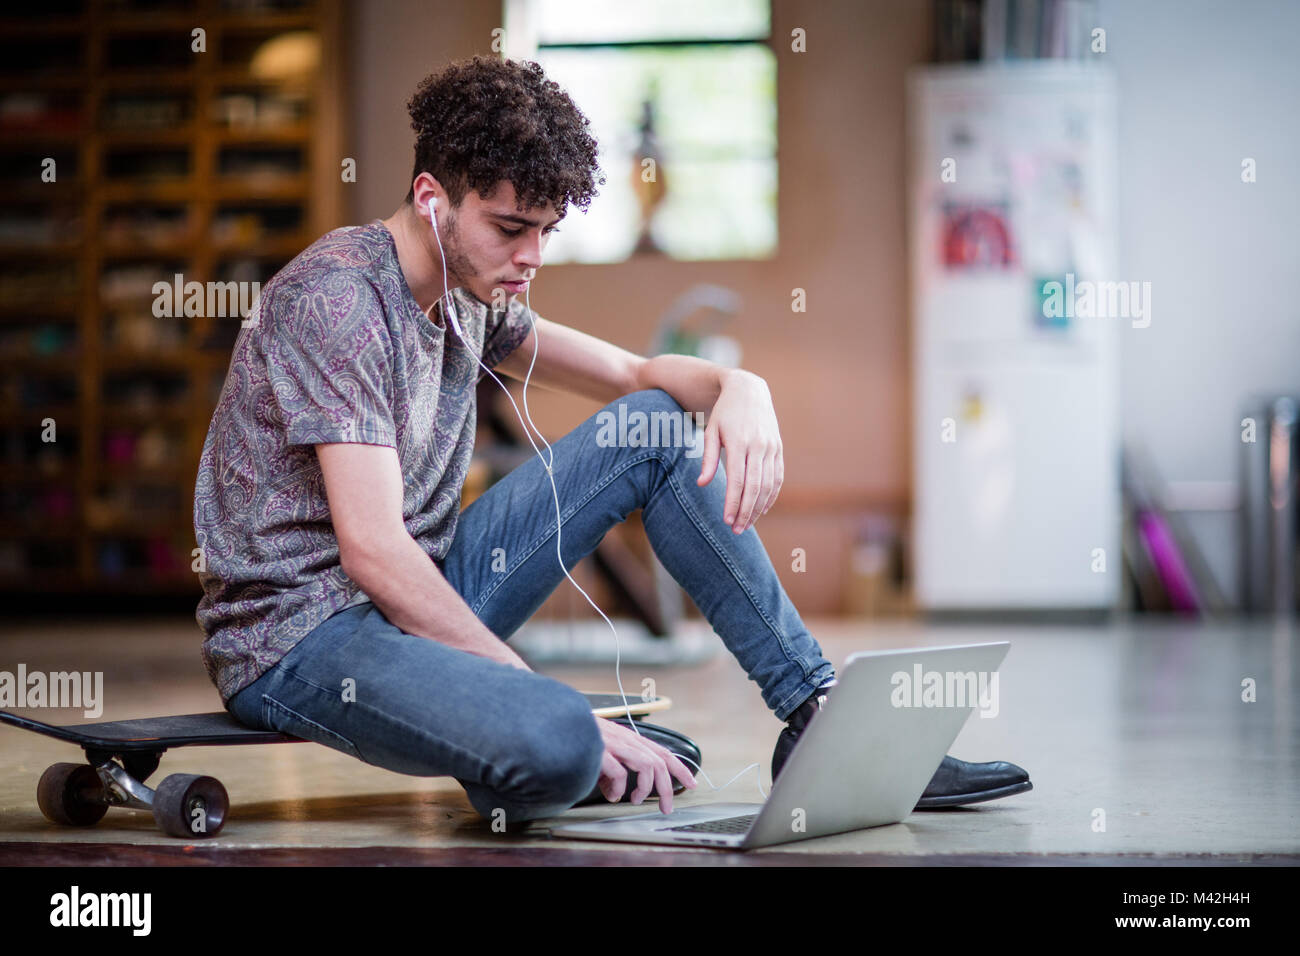 Young adult male sitting on skateboard using laptop Stock Photo